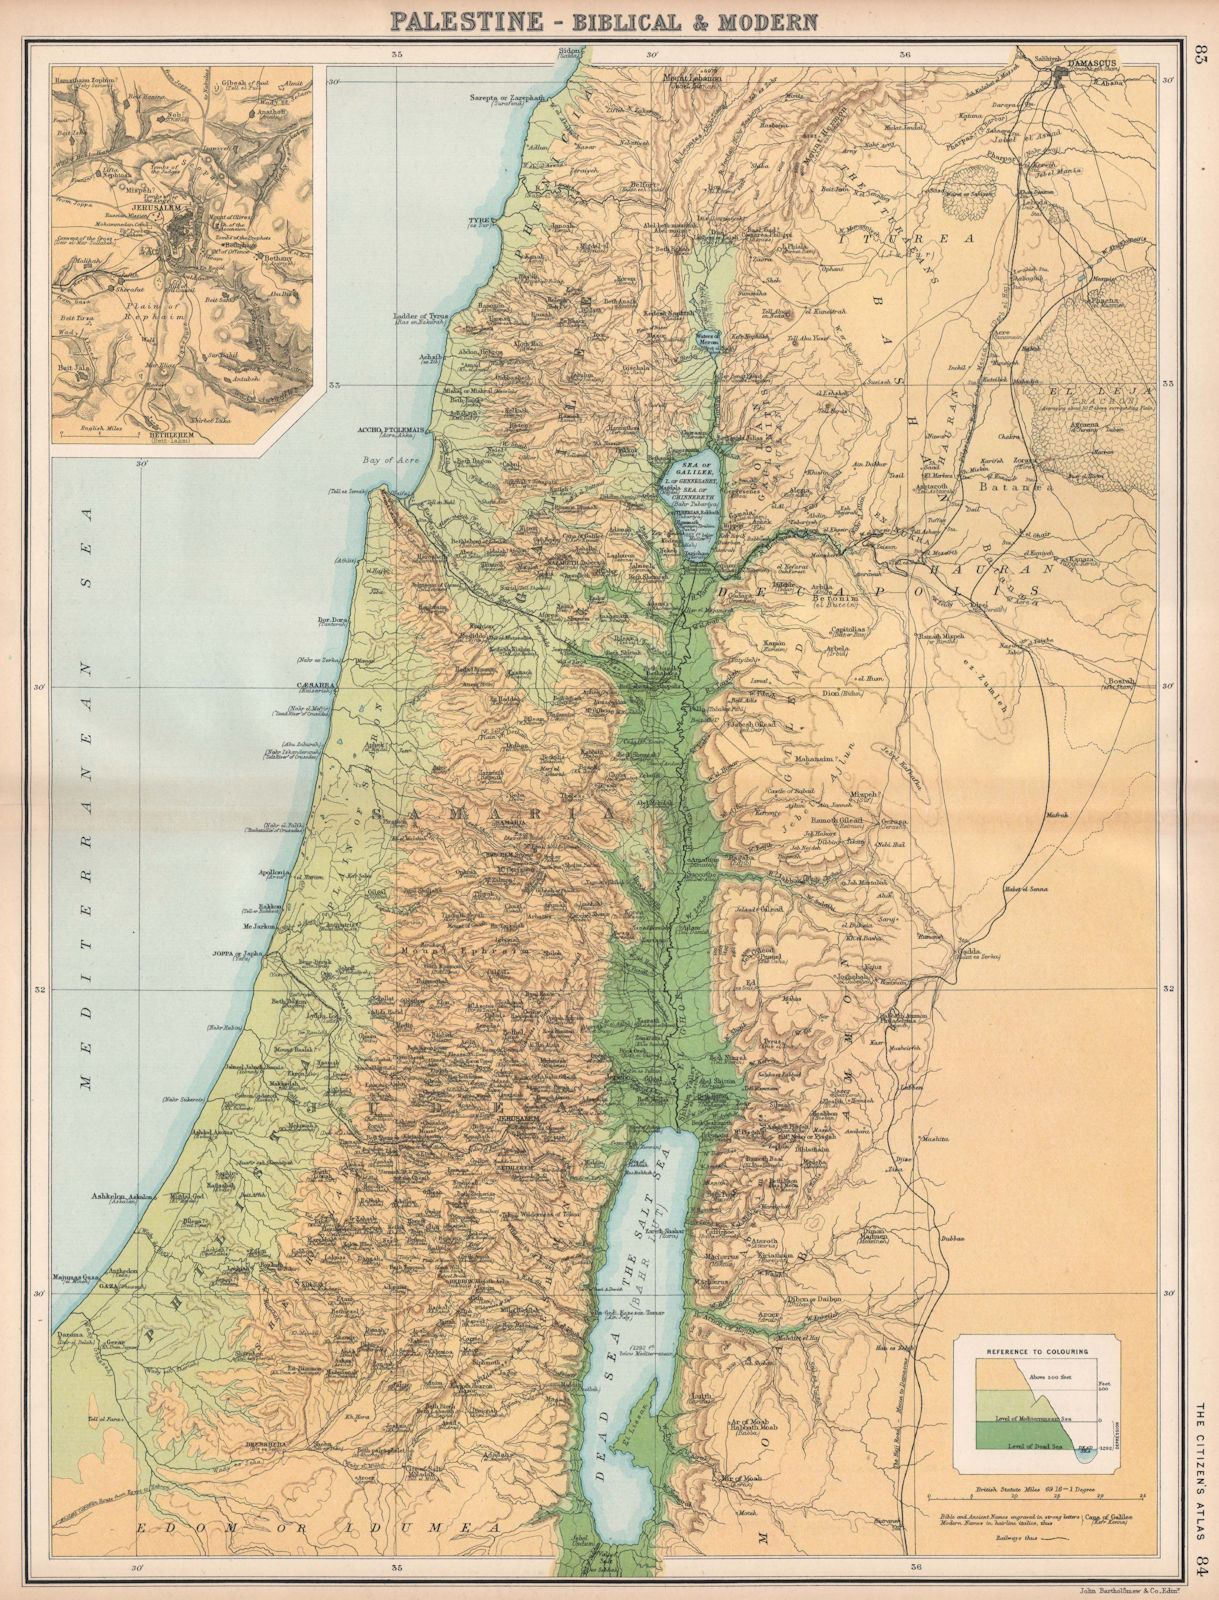 PALESTINE & JERUSALEM. Biblical and ancient place names. Relief. Israel 1912 map